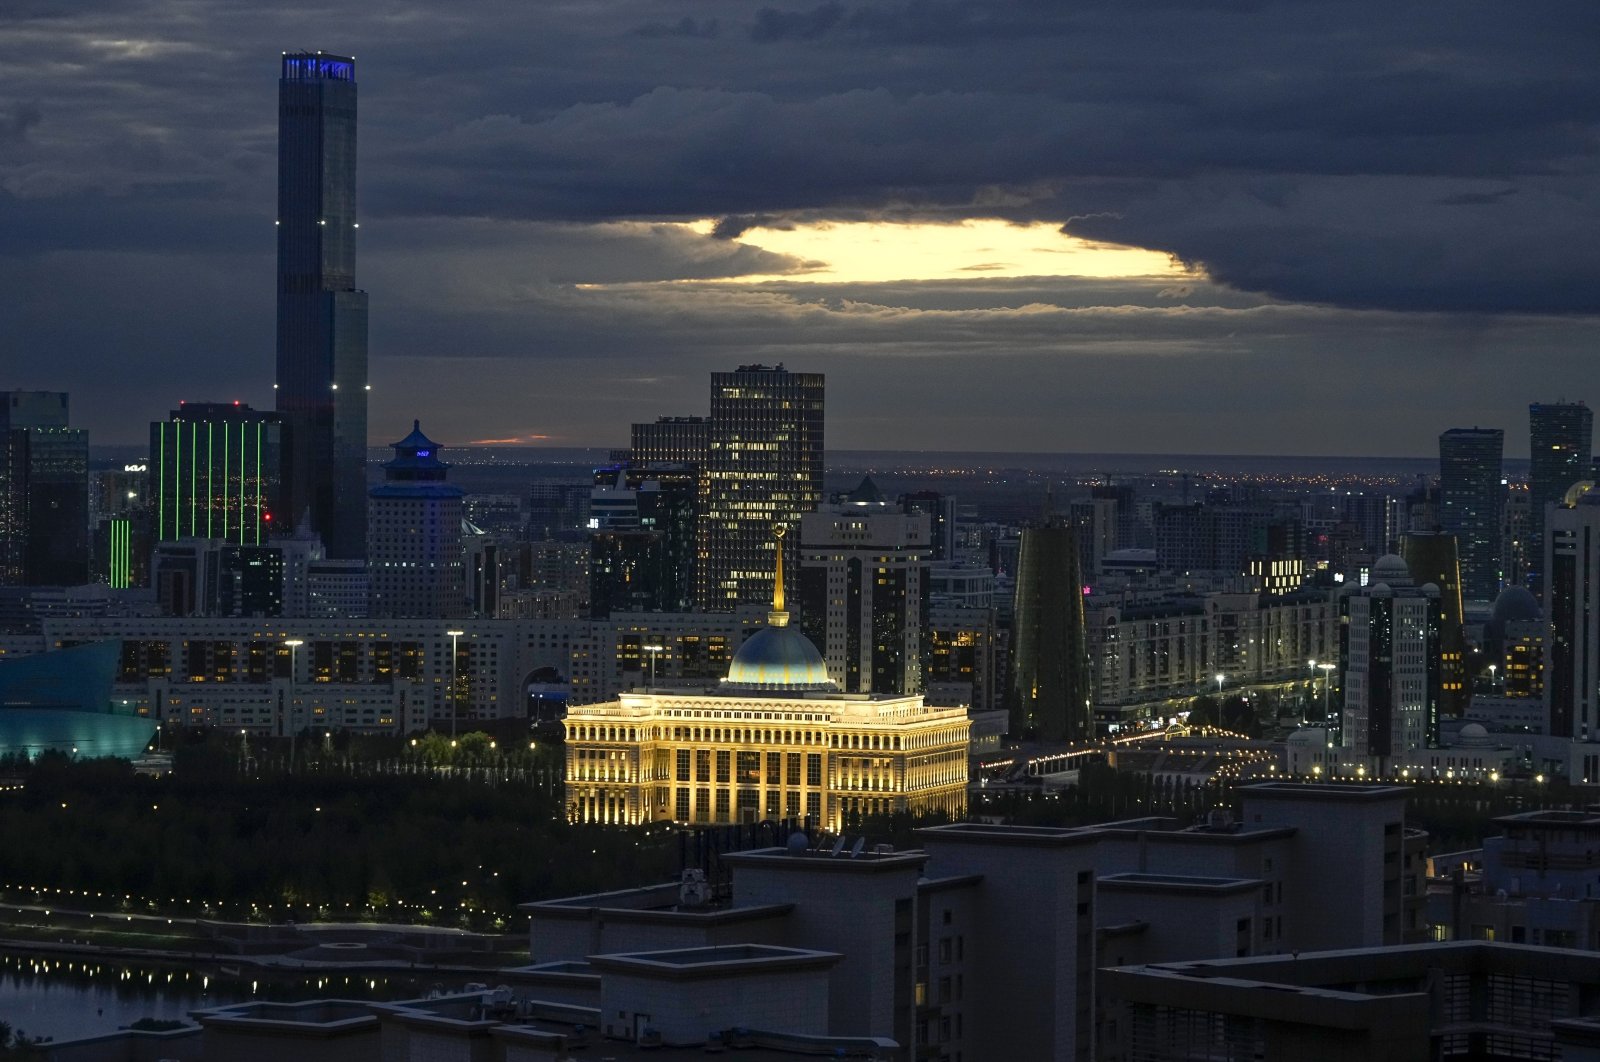 A night view of the capital Astana, formerly name Nur-Sultan, with the Presidential Palace seen in the center, Kazakhstan, Sept. 12, 2022. (AP Photo)